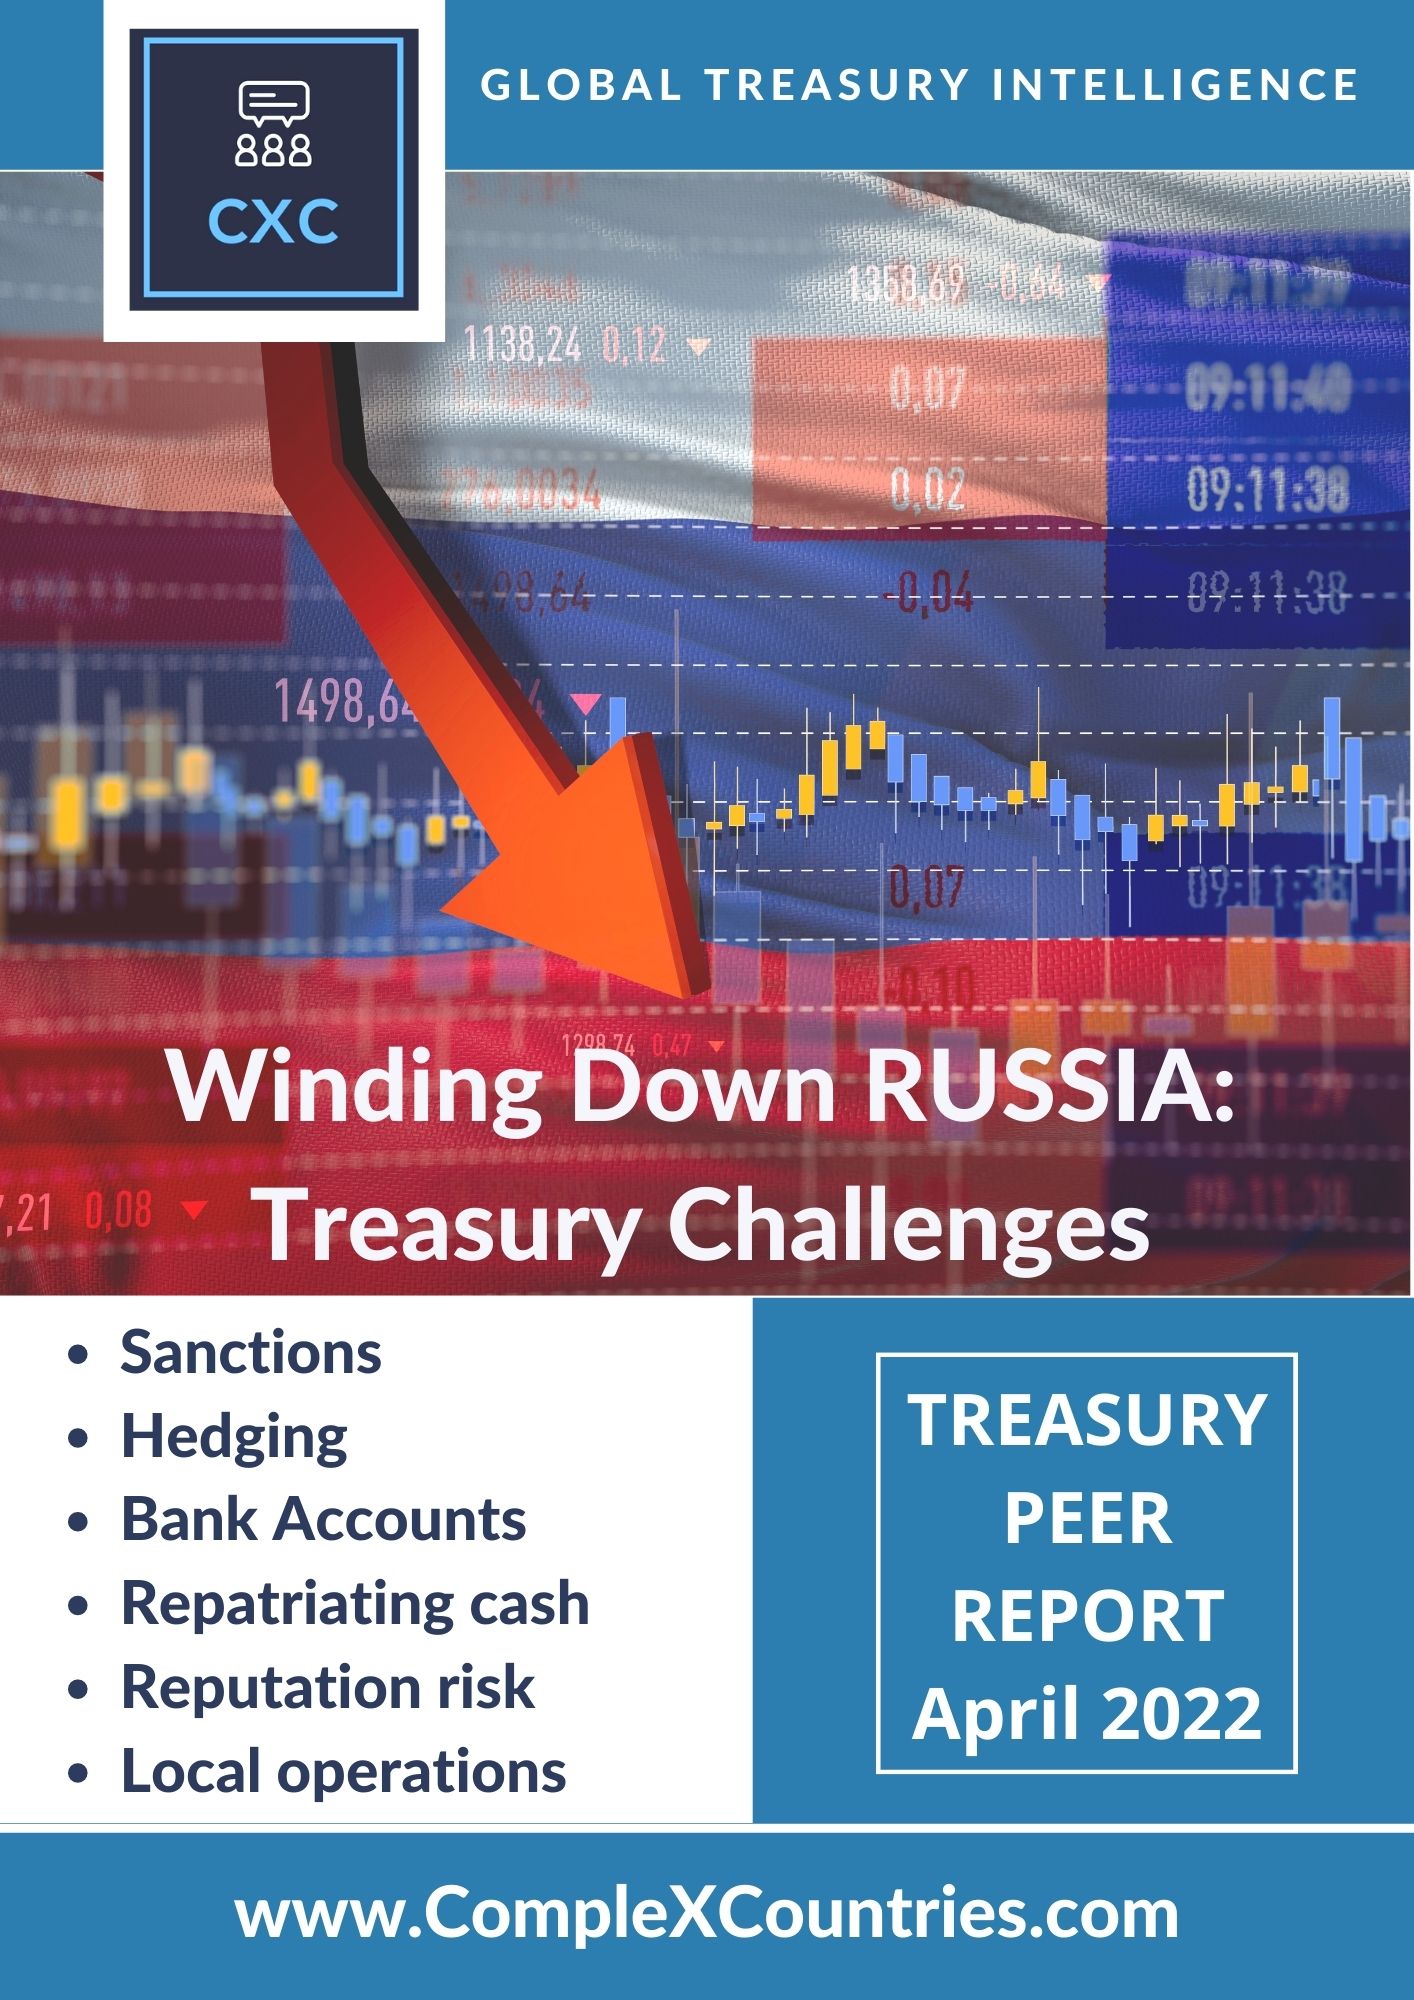 Winding Down Russia: Treasury Challenges